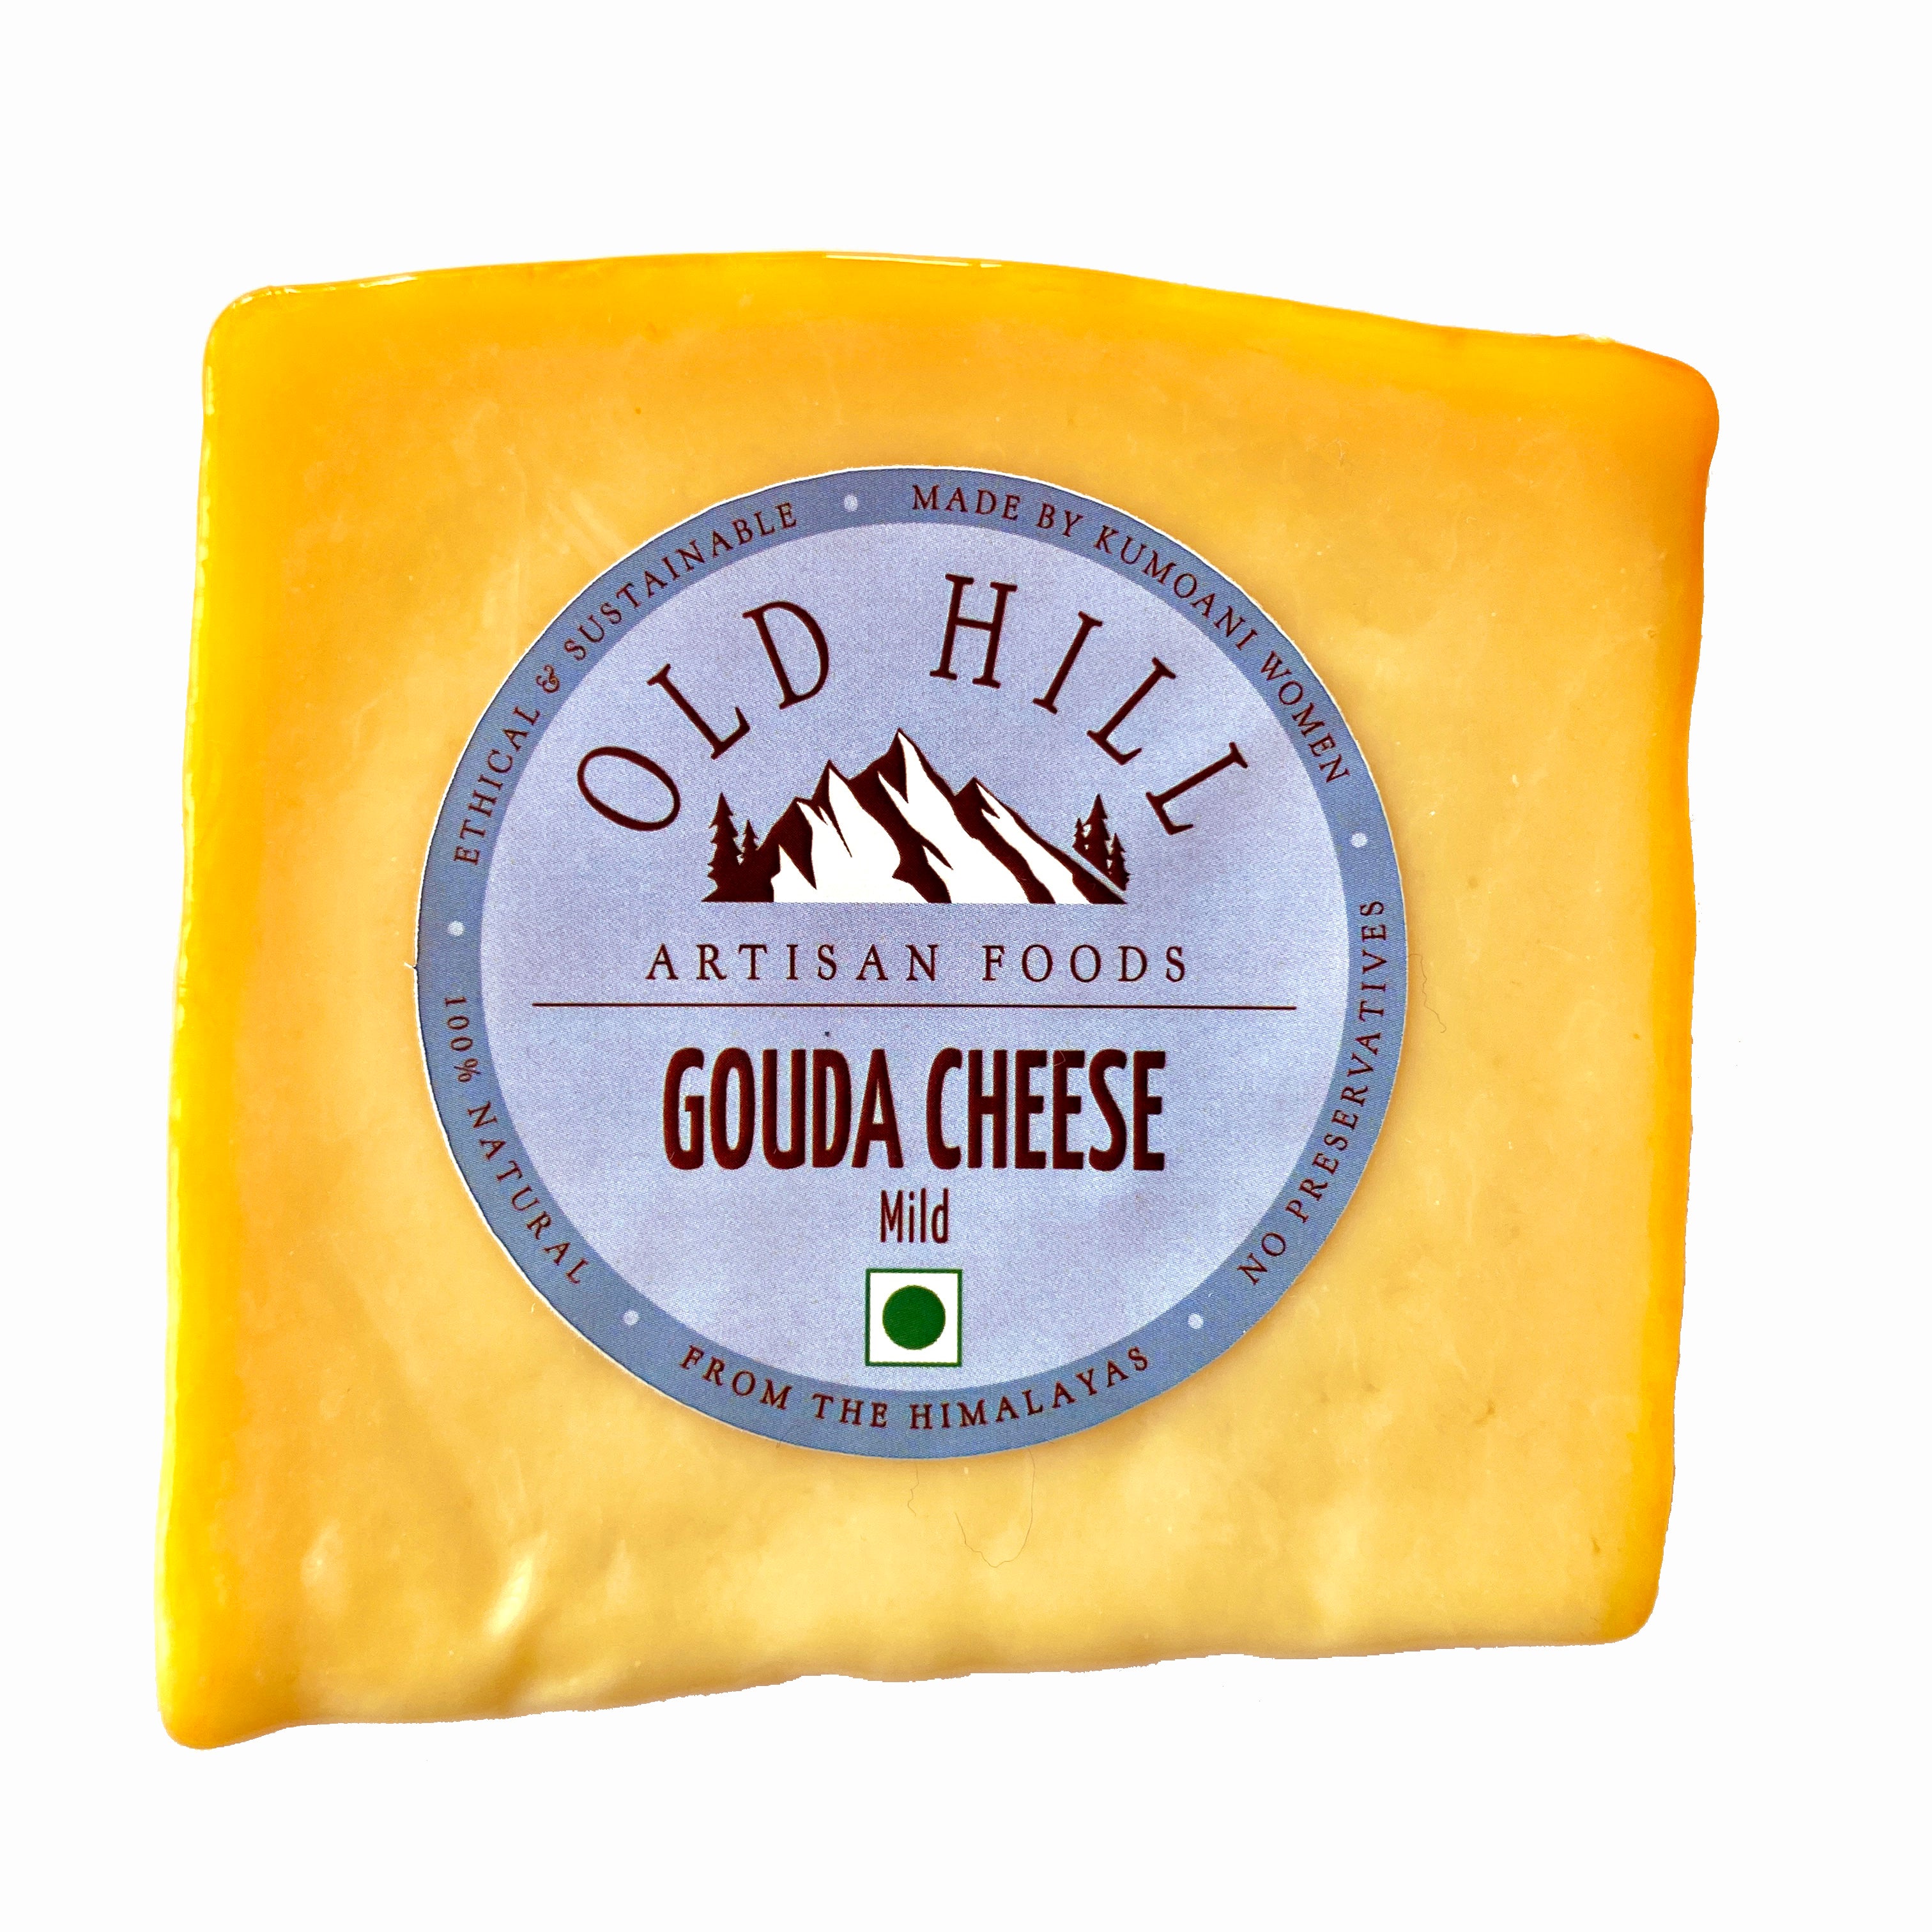 GOUDA CHEESE - YOUNG / MILD (Old Hill)